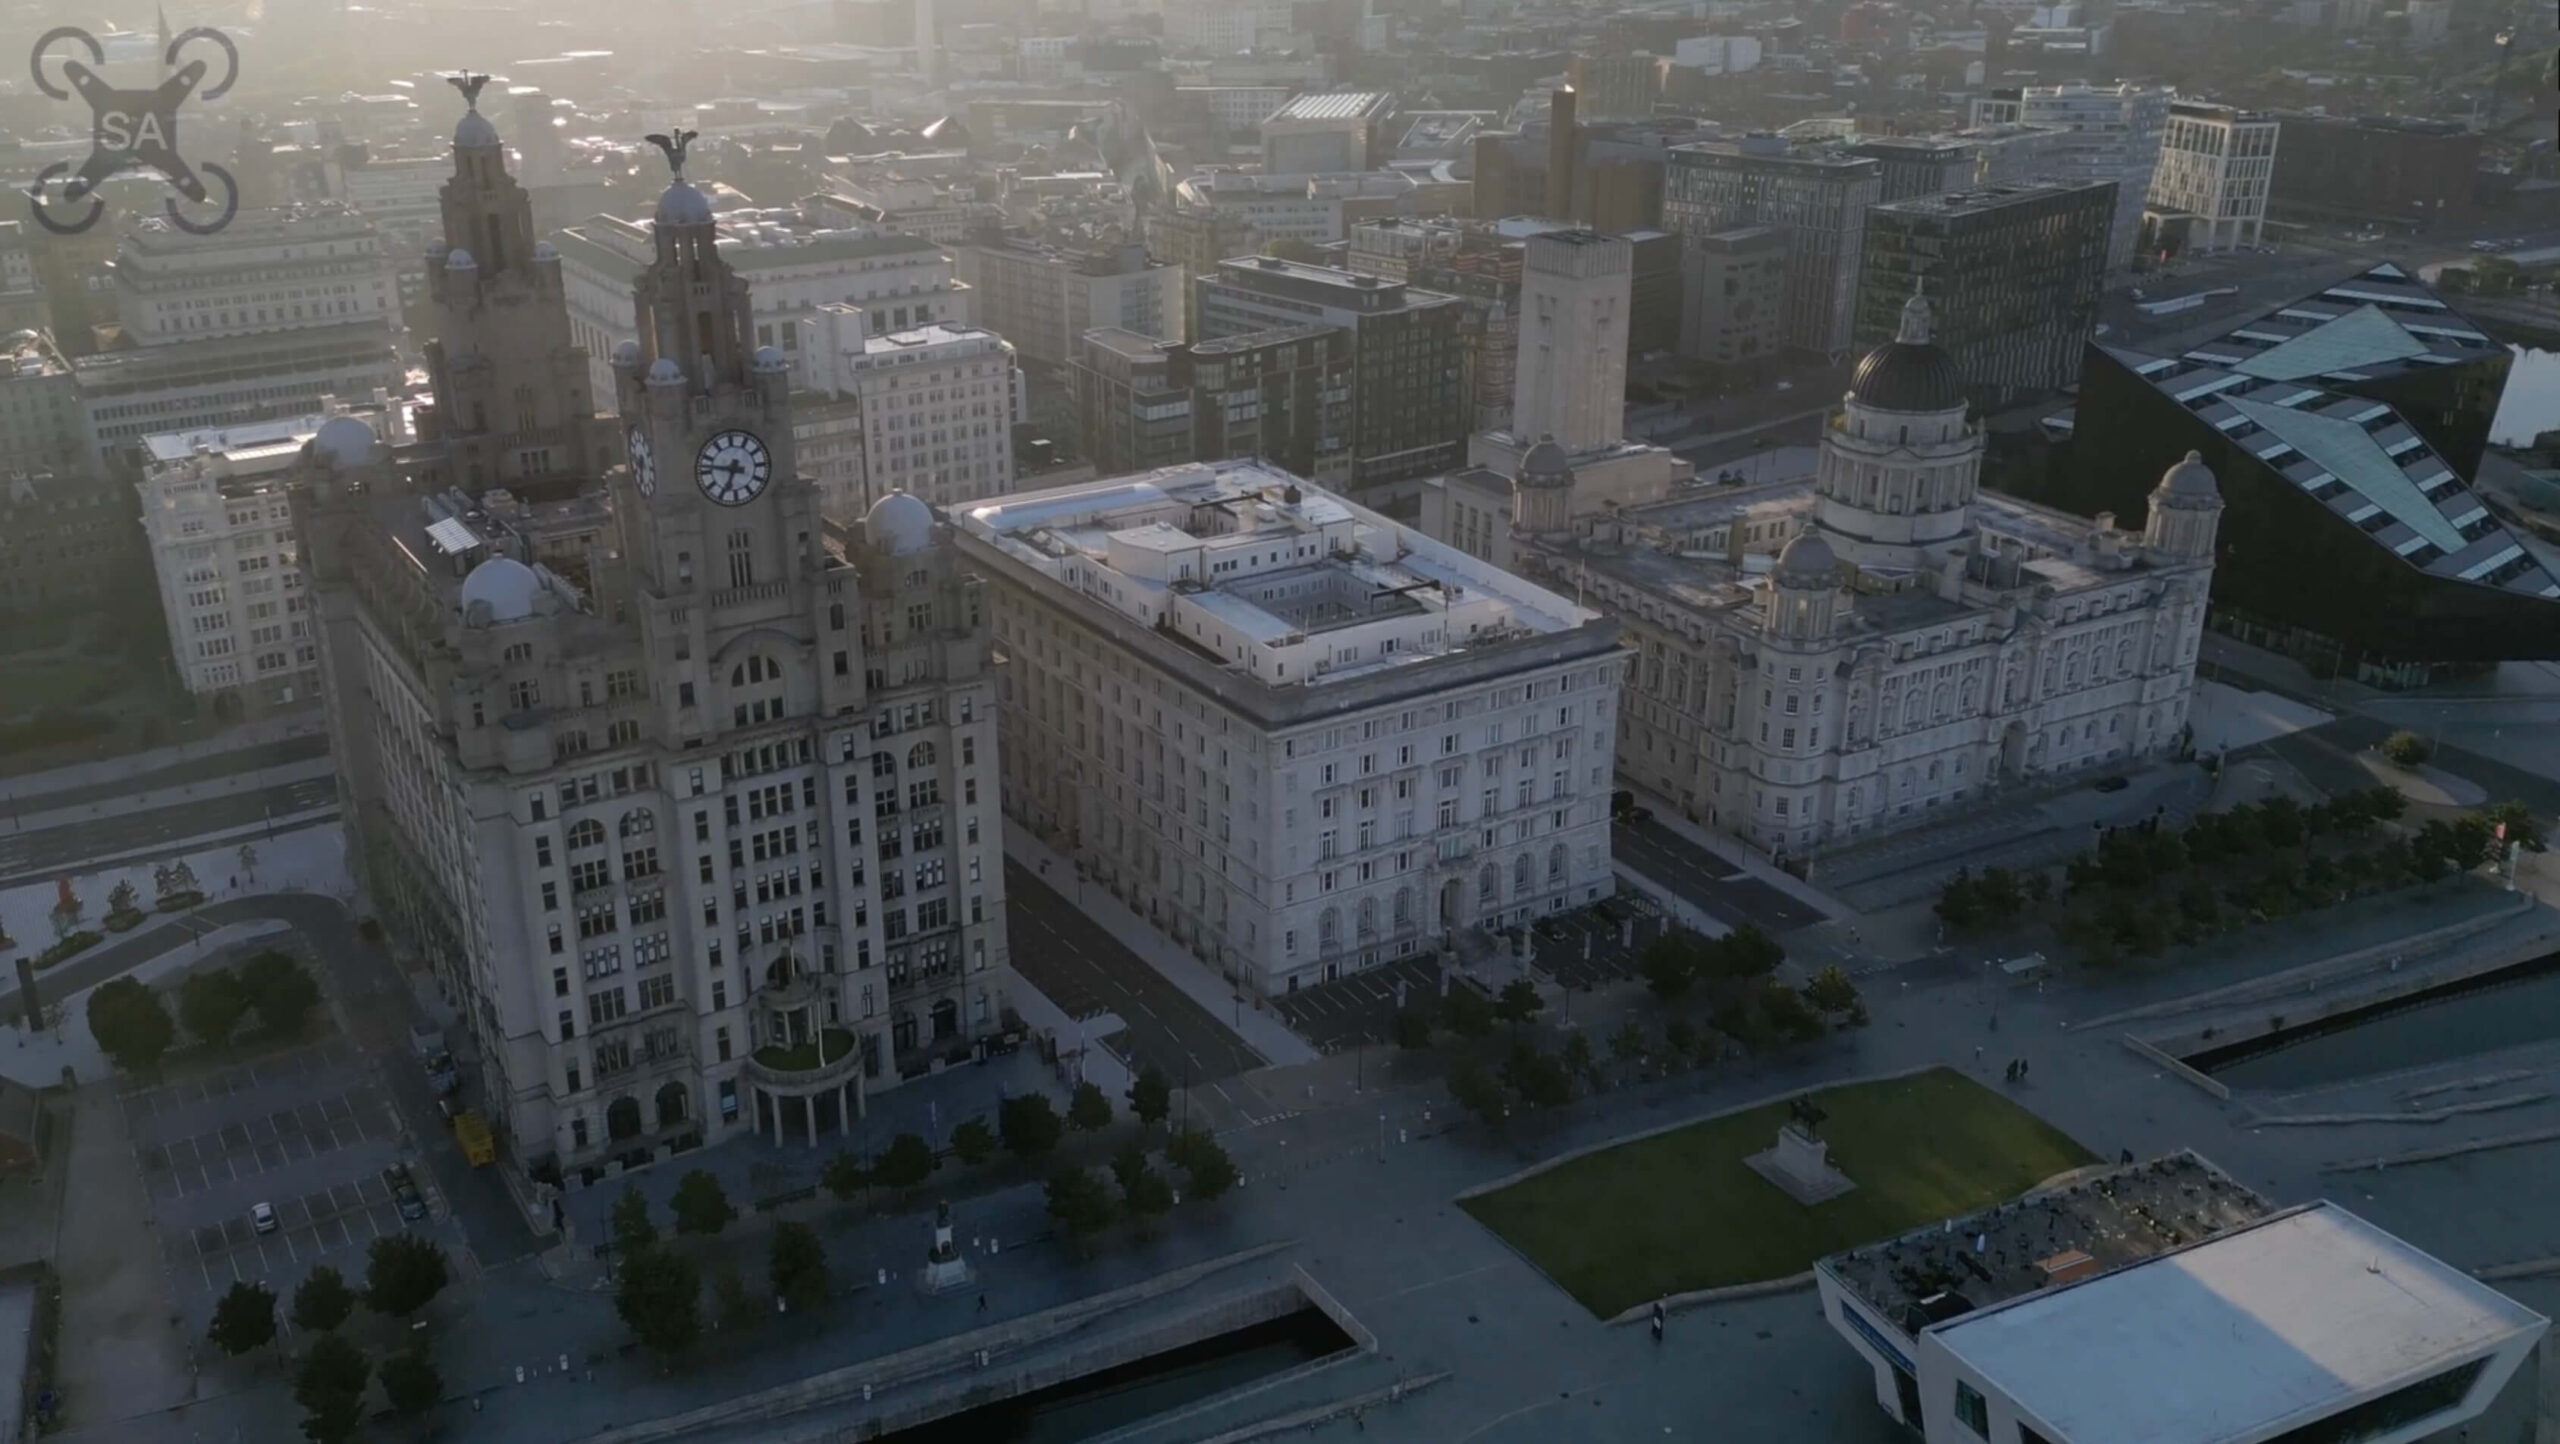 The Three Graces and Liverpool Cathedrals